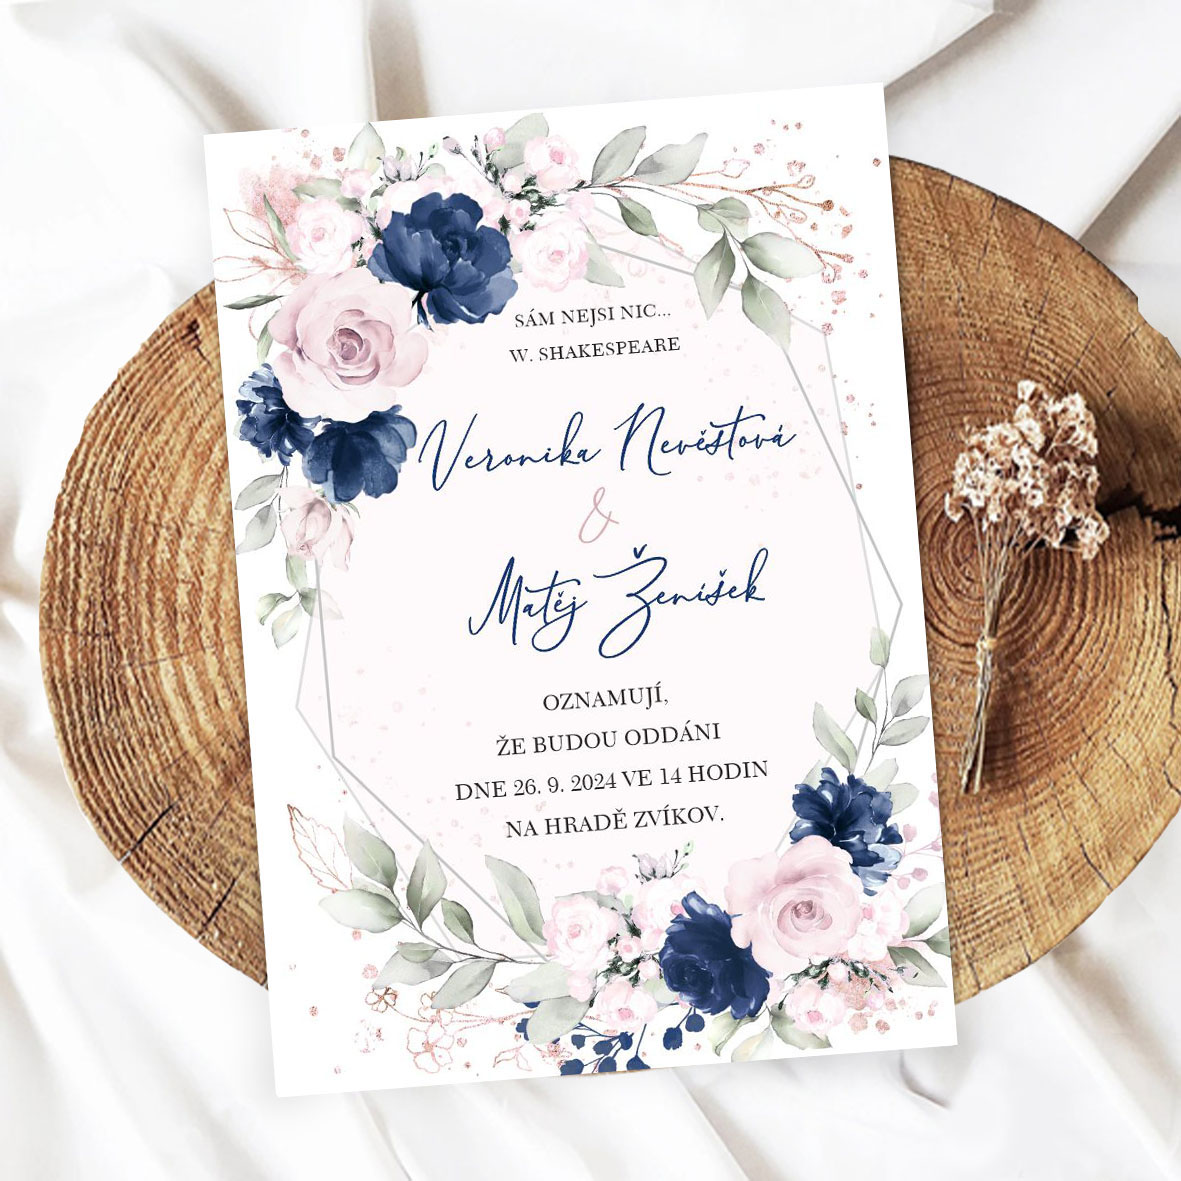 Wedding invitation with blue and pink flowers